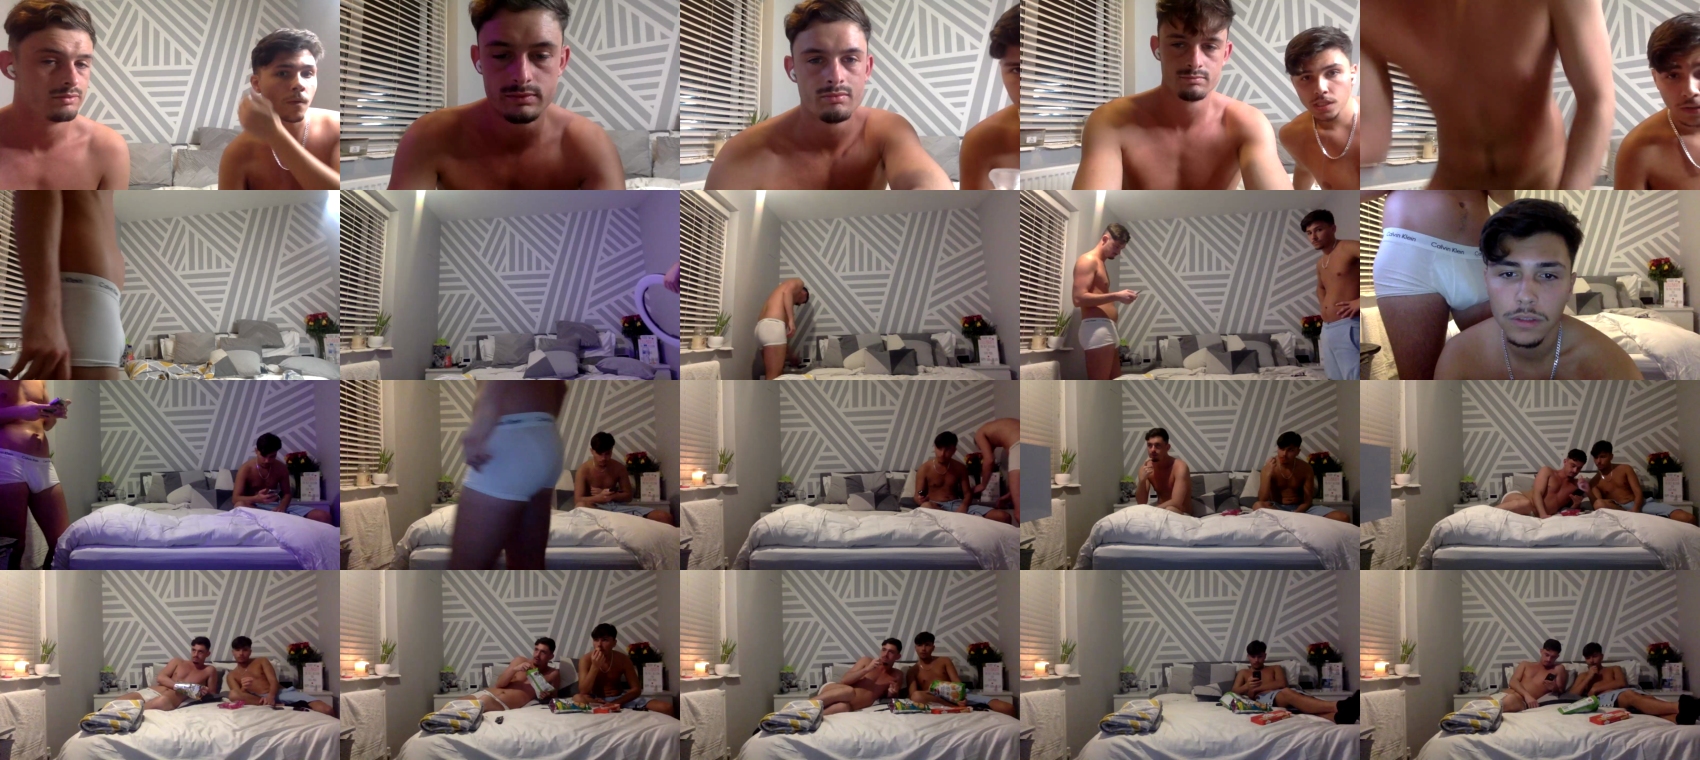 two_lads sexybody CAM SHOW @ Chaturbate 15-01-2022